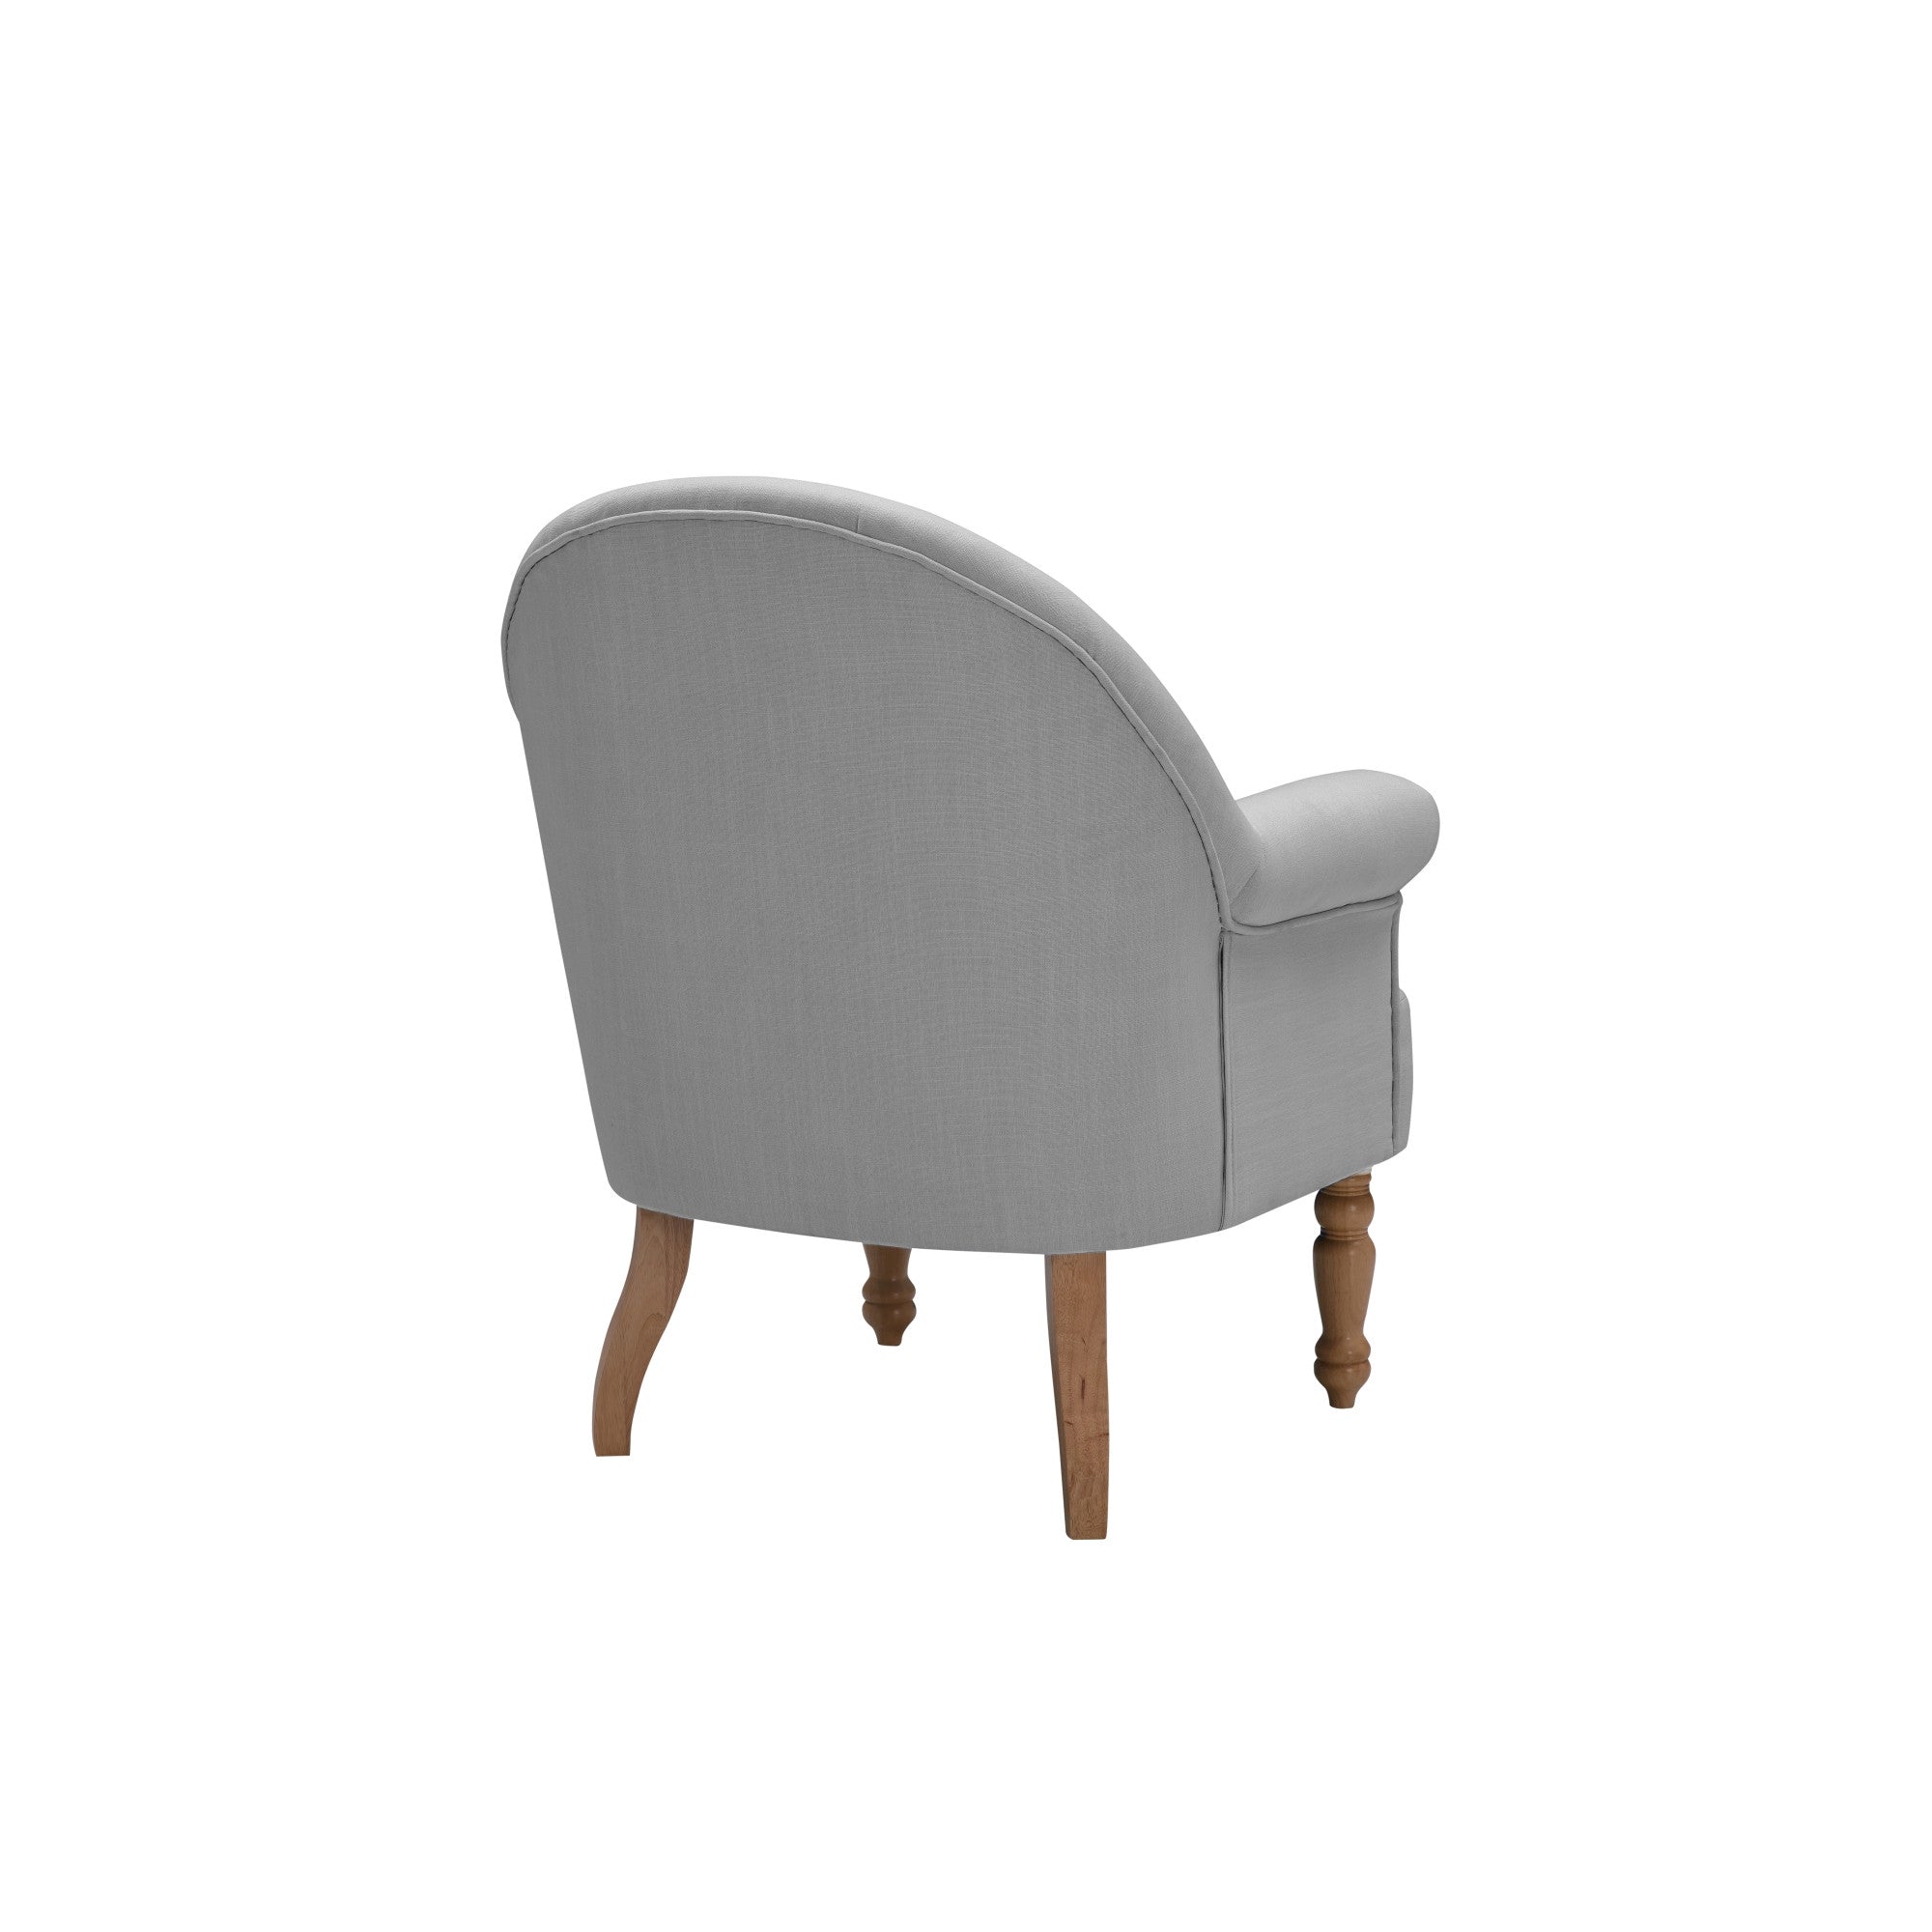 33" Dark Gray And Brown Linen Arm Chair